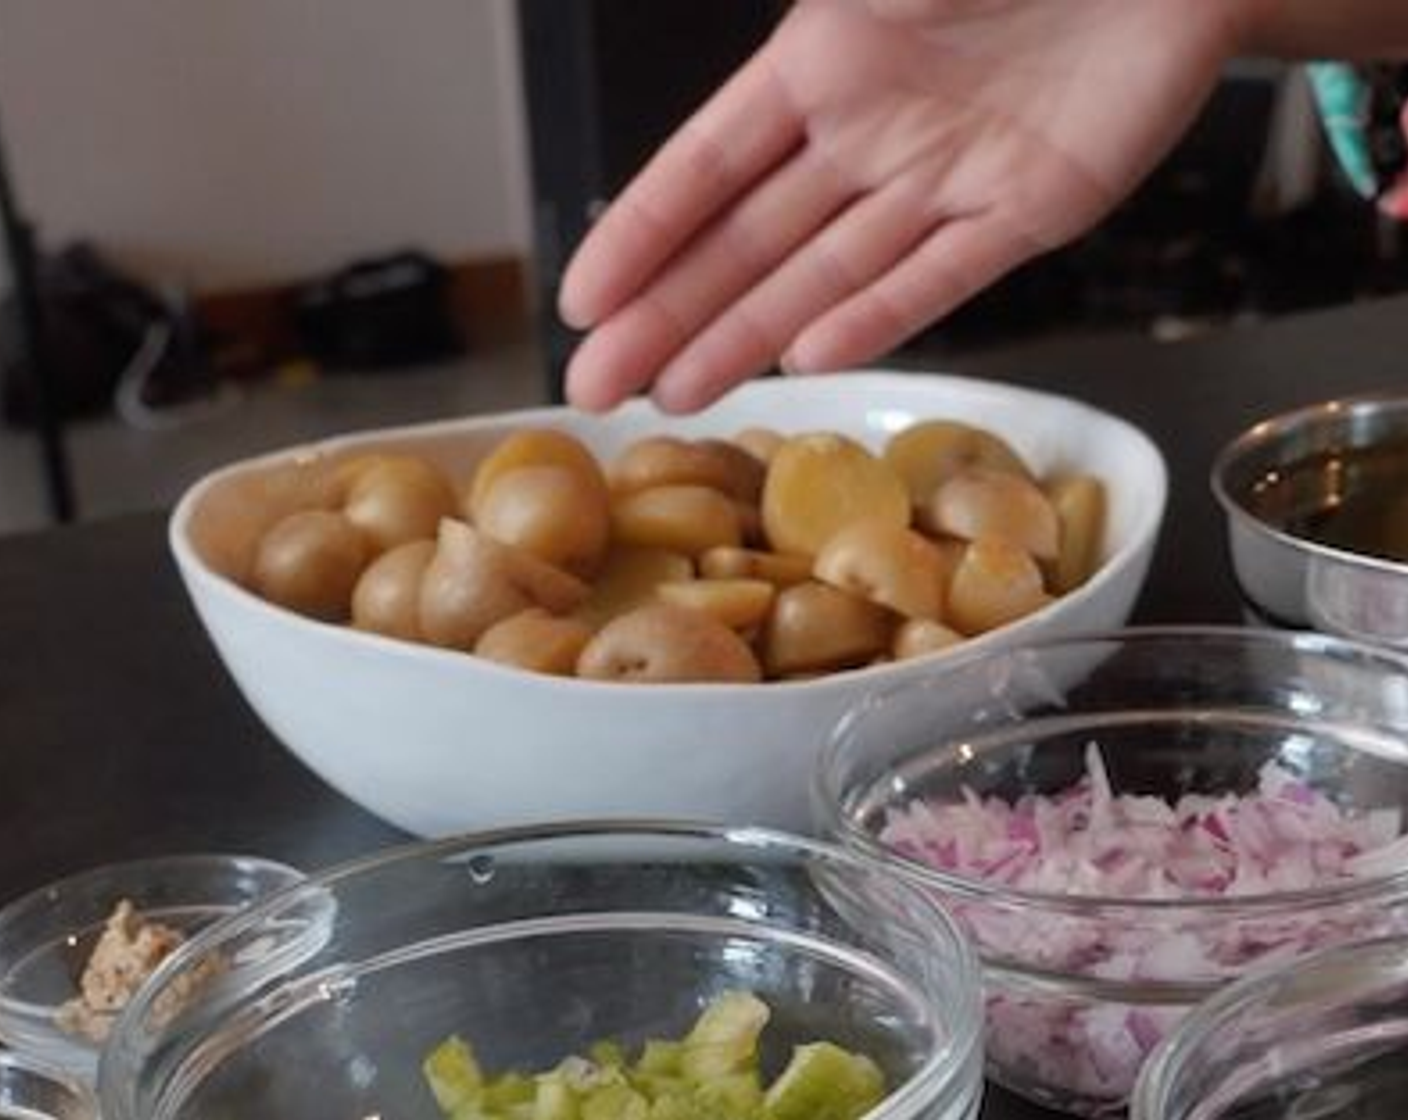 step 2 Once cooked, drain the potatoes and immediately transfer to a large bowl. Cover the bowl with plastic wrap, but leave an edge open to allow heat to escape. Pop the boiled potatoes into the fridge to chill. Once chilled, cut them in half before mixing into the rest of the salad.